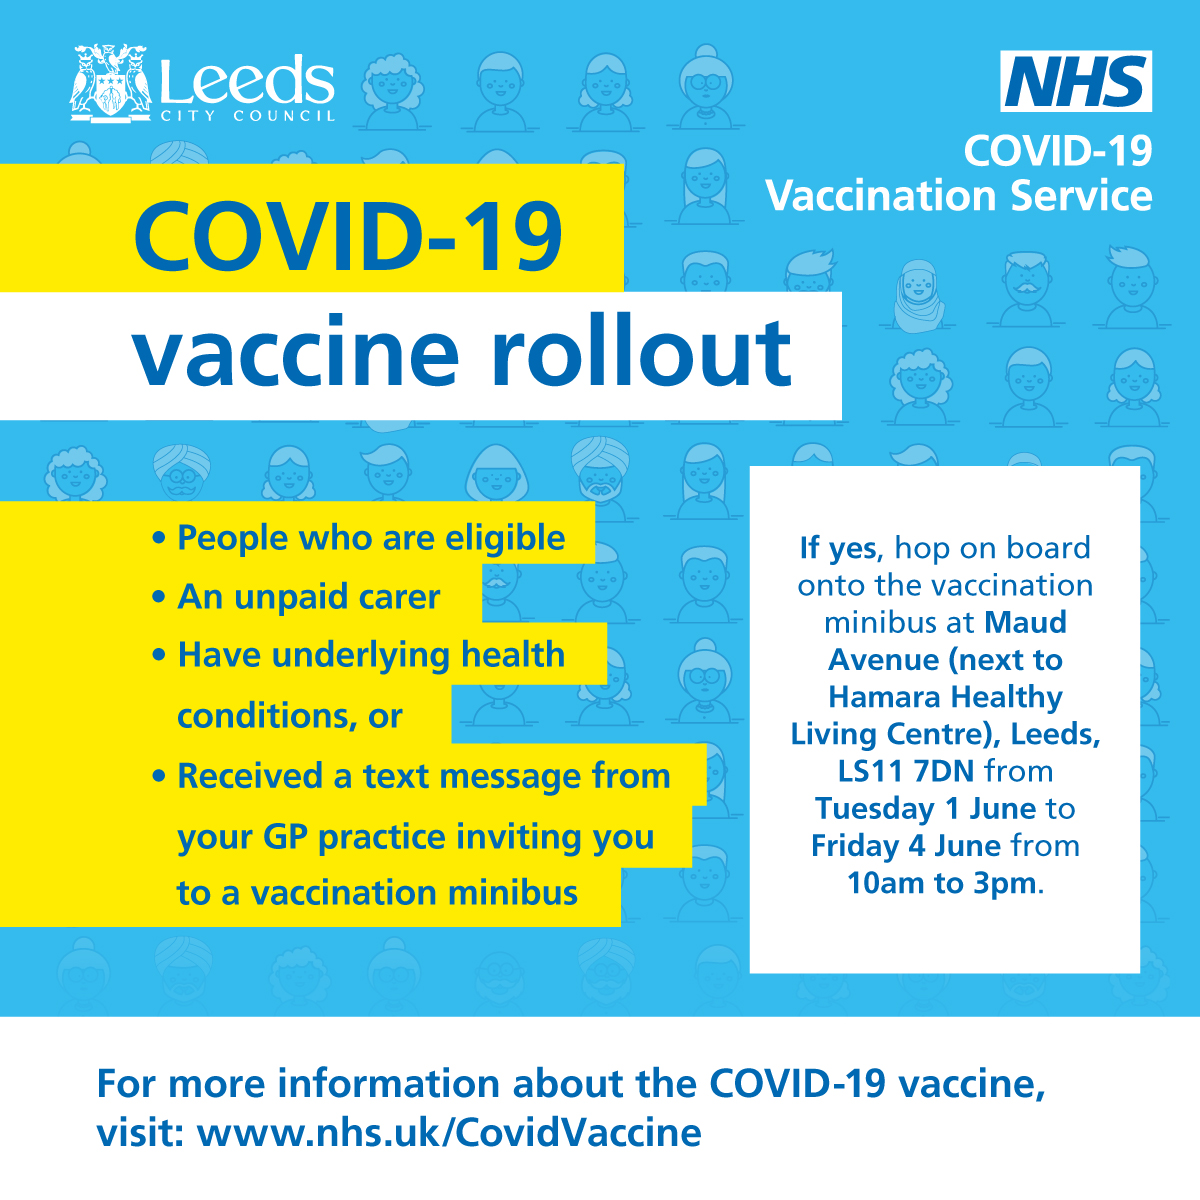 A Covid vaccine minibus will be on Maud Ave next to @HamaraCentre in #BeestonHill from Tues 1 June and AstraZeneca will be on the menu. It's free & no appointment needed! Healthcare professionals will also be available to answer any questions you may have about the vaccine